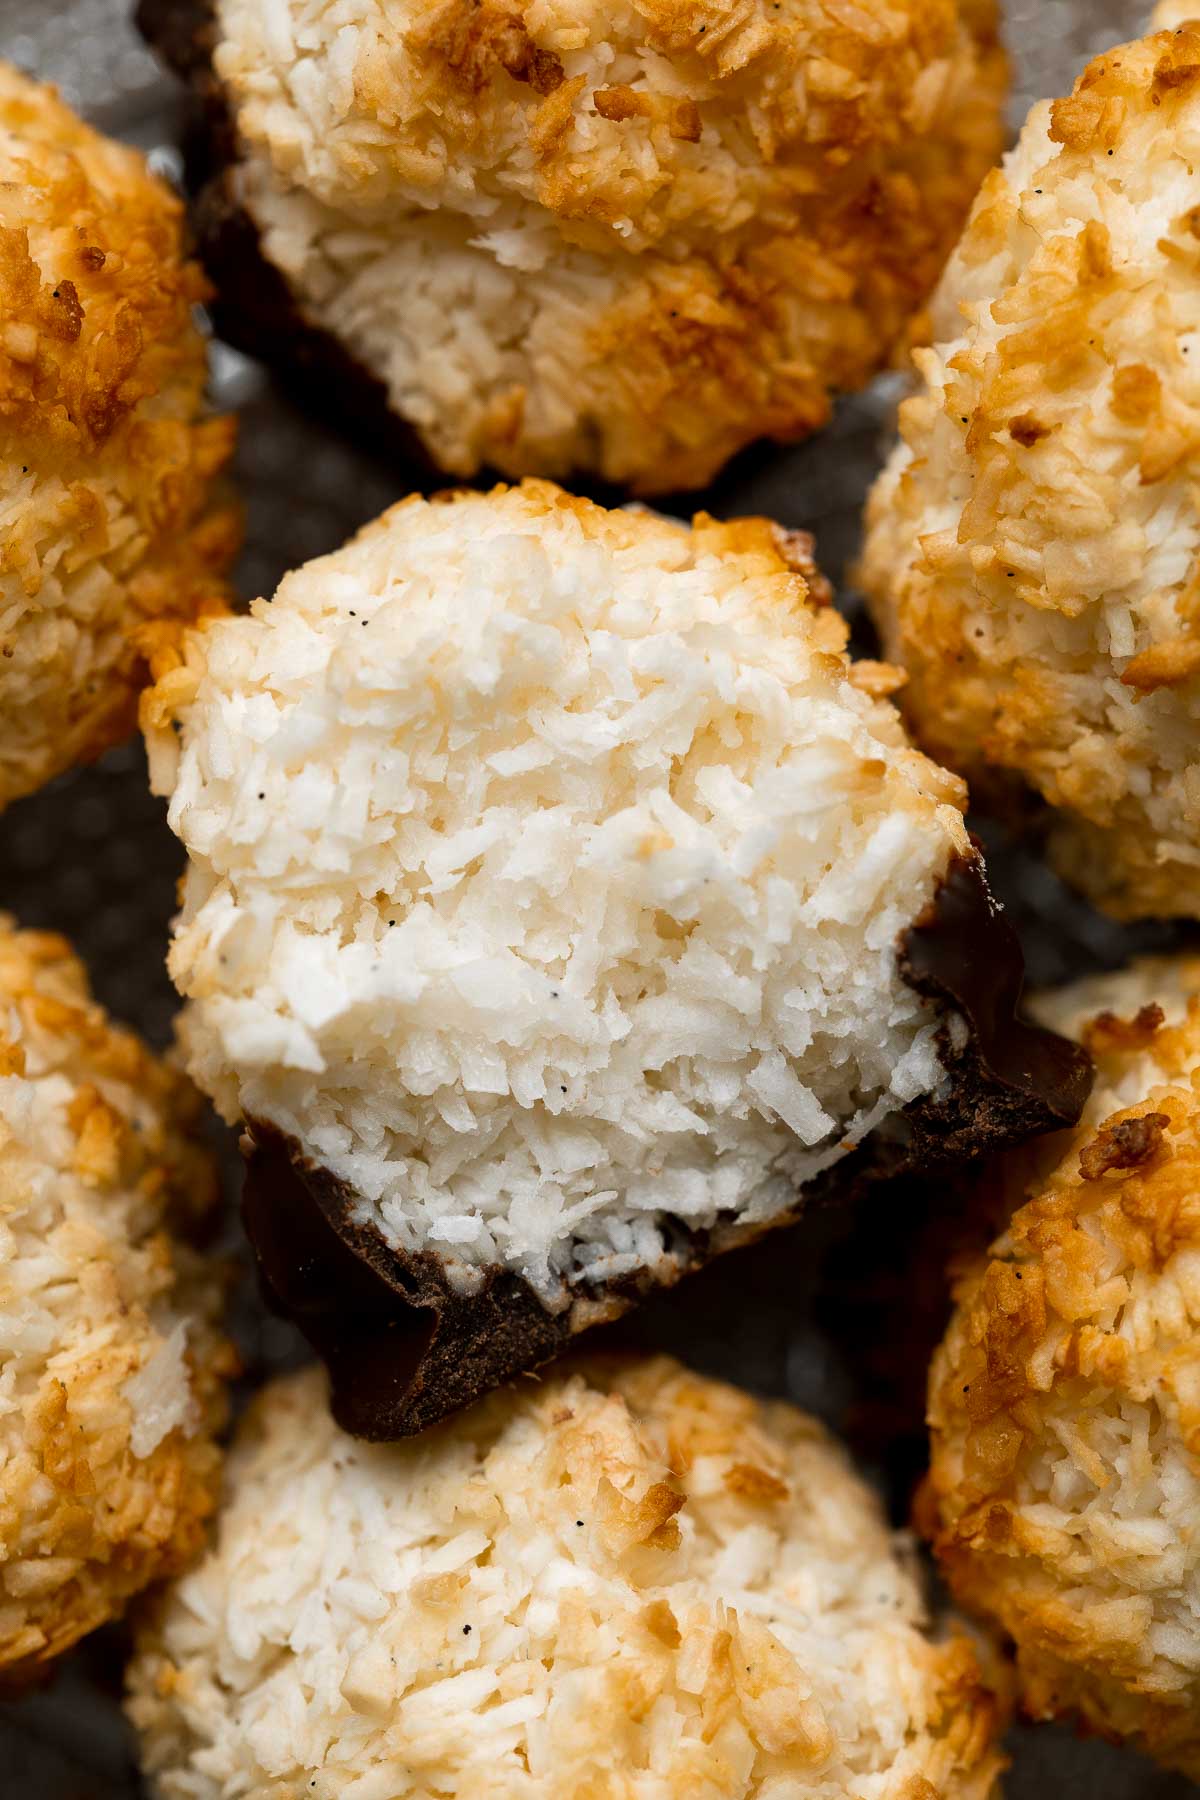 Coconut macaroons are crispy on the outside with a soft and chewy center. Dip or drizzle with chocolate for an even more delicious flavor combo. | aheadofthyme.com